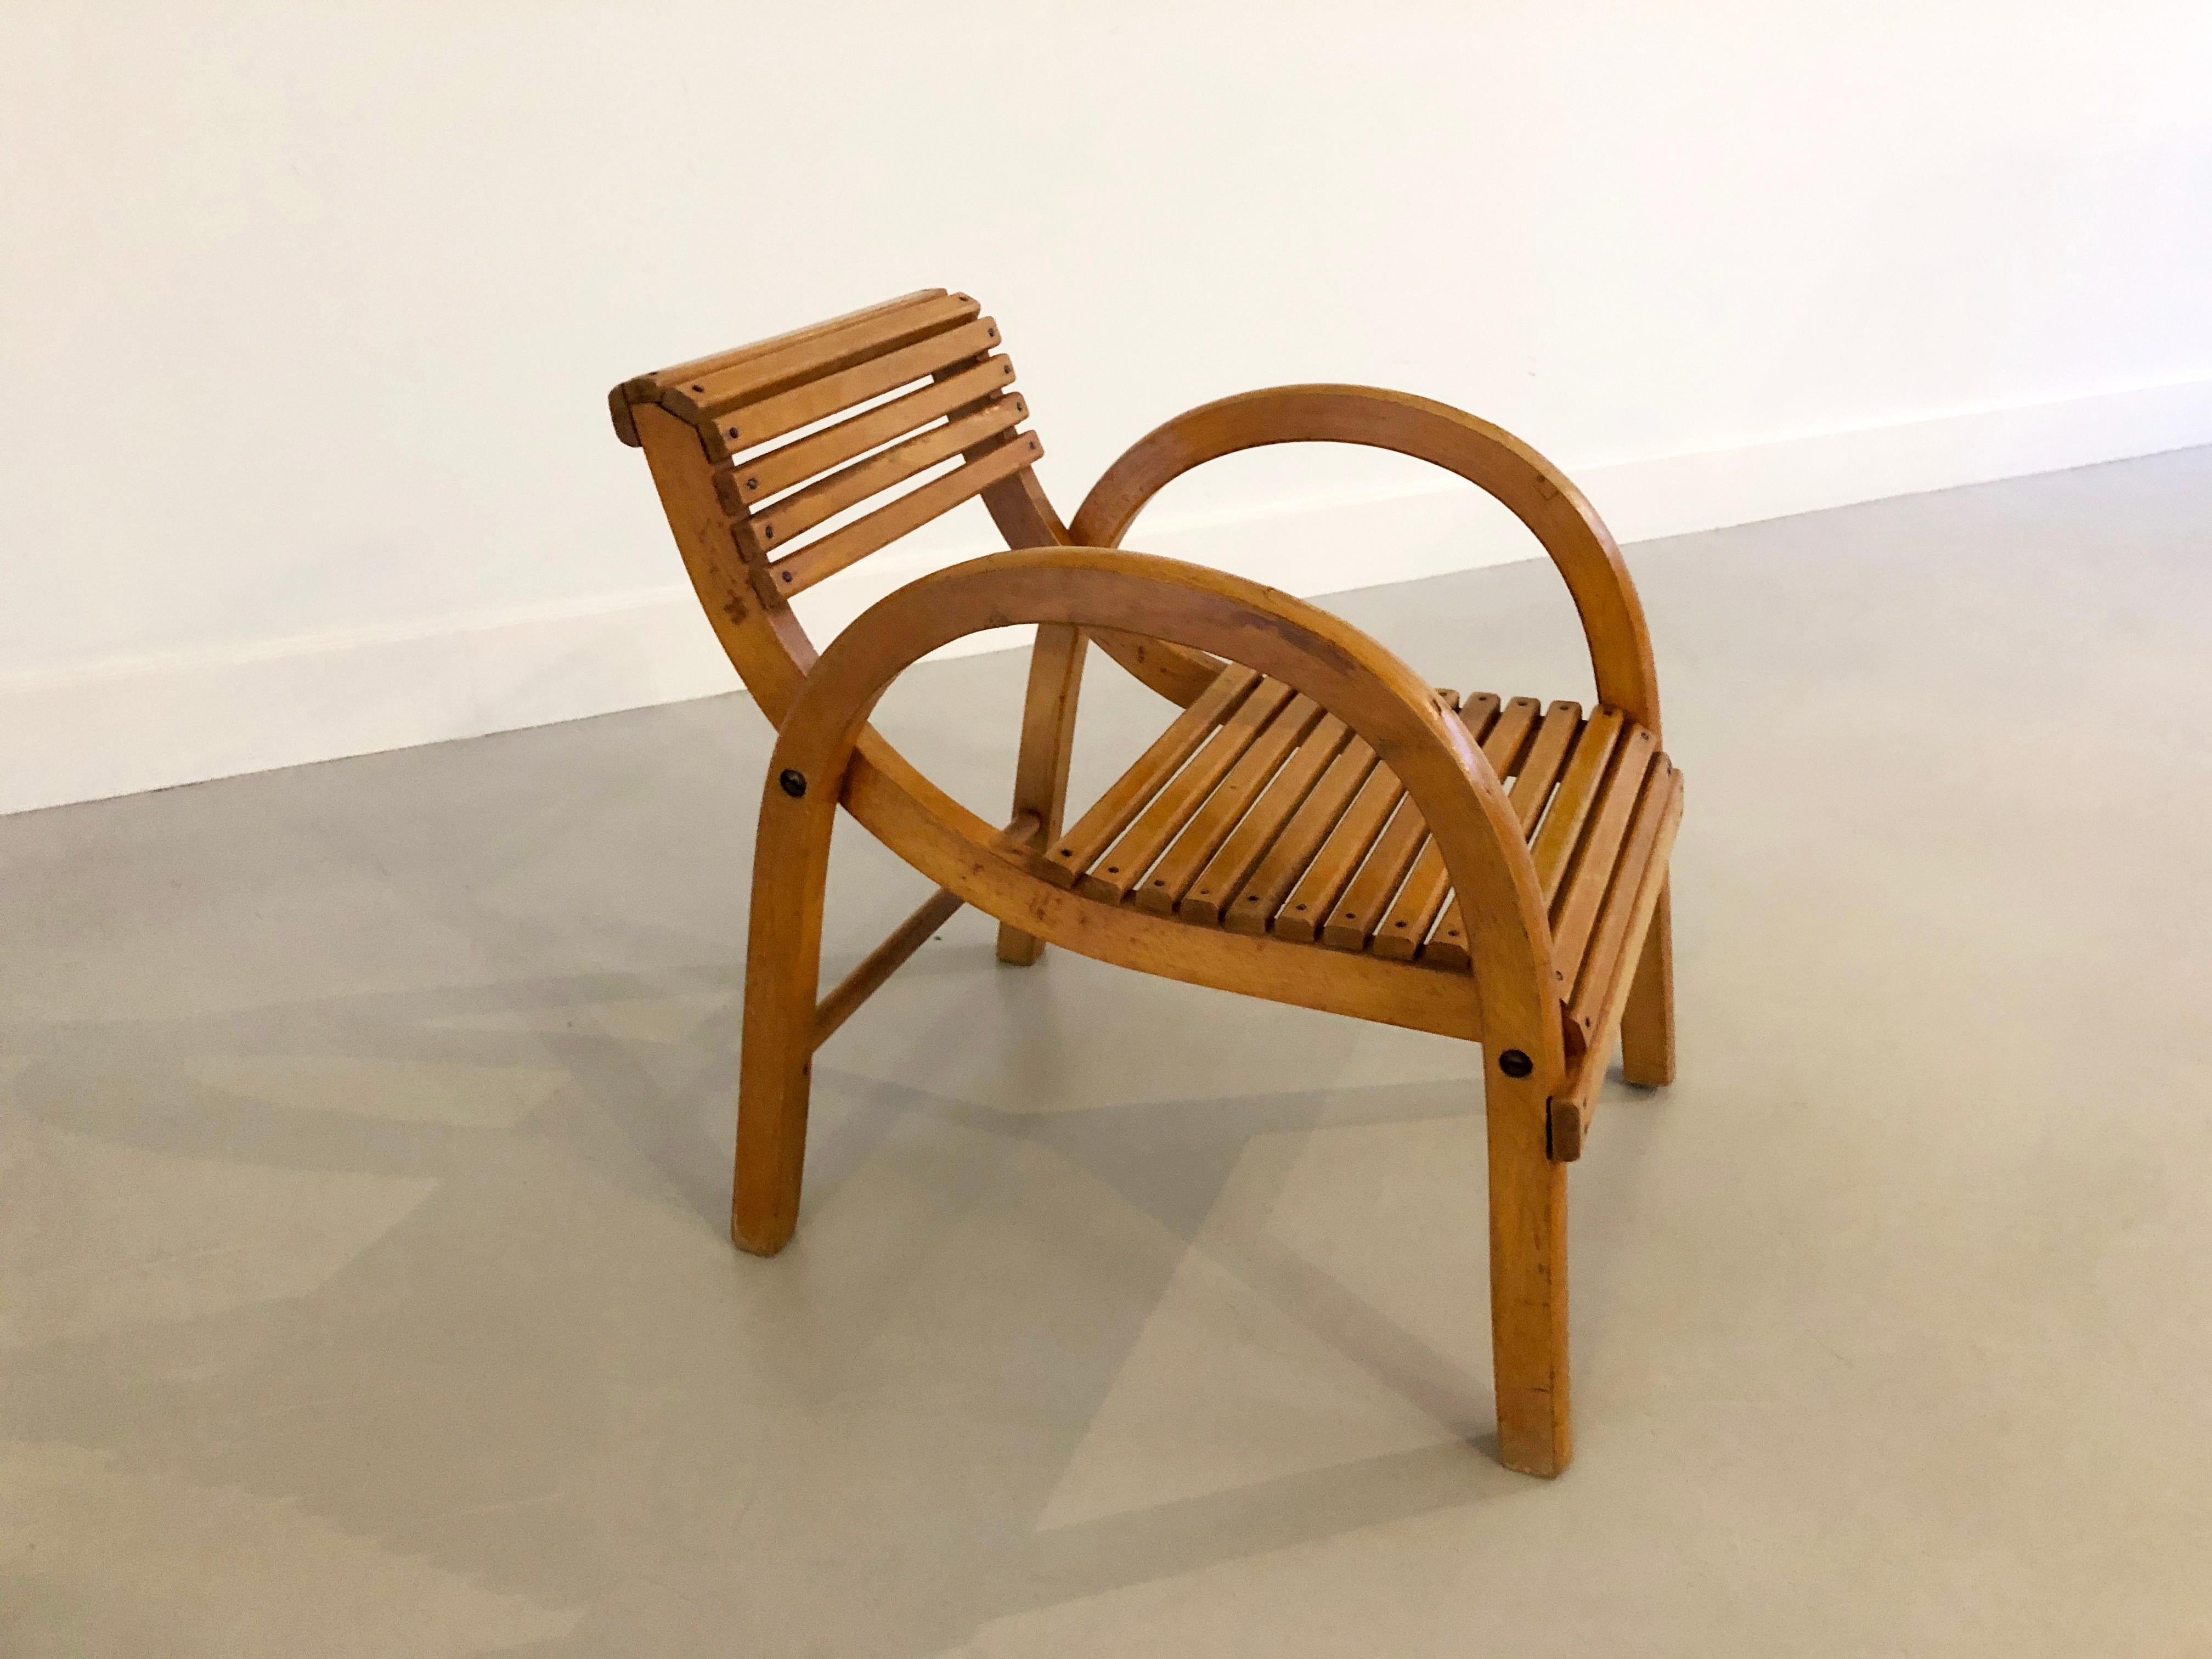 Child bentwood chair, French design children furnitures, Beech wood Baumann modernist design. 

Baumann factory is a furniture company located in a former clog factory in Colombier-Fontaine in the Doubs (France). It is one of the twentieth century’s